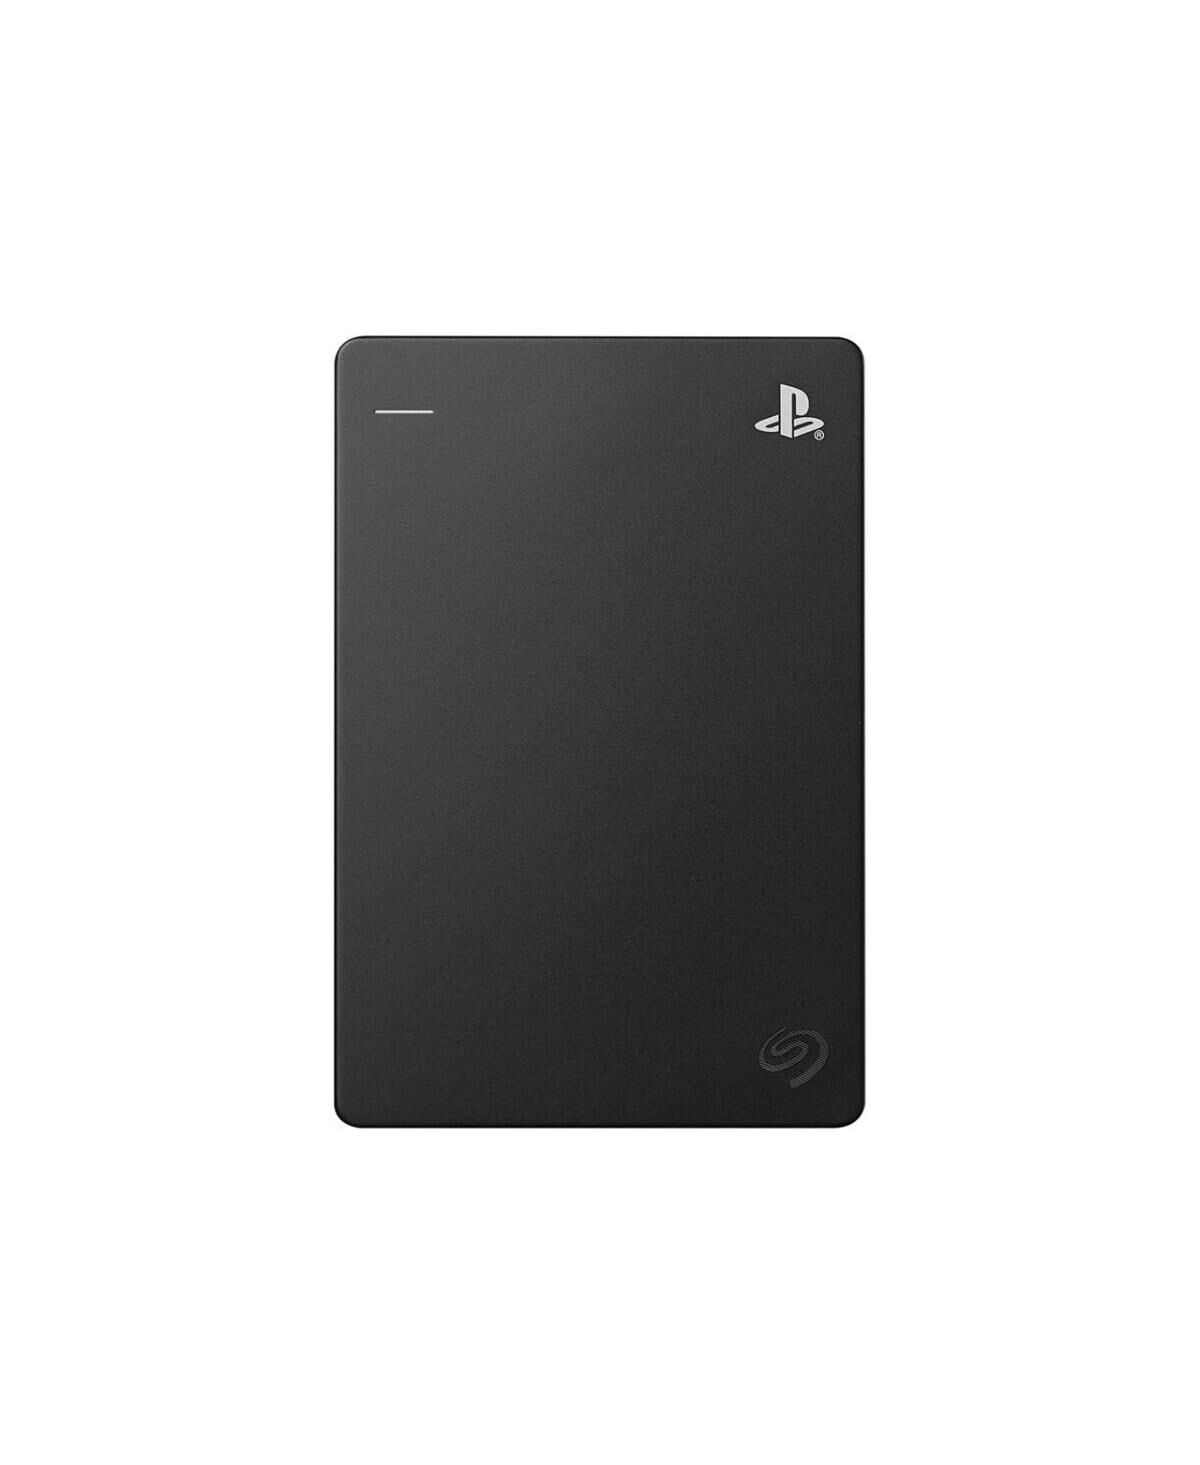 Seagate Retail 4TB Game Drive for Play Station - Black